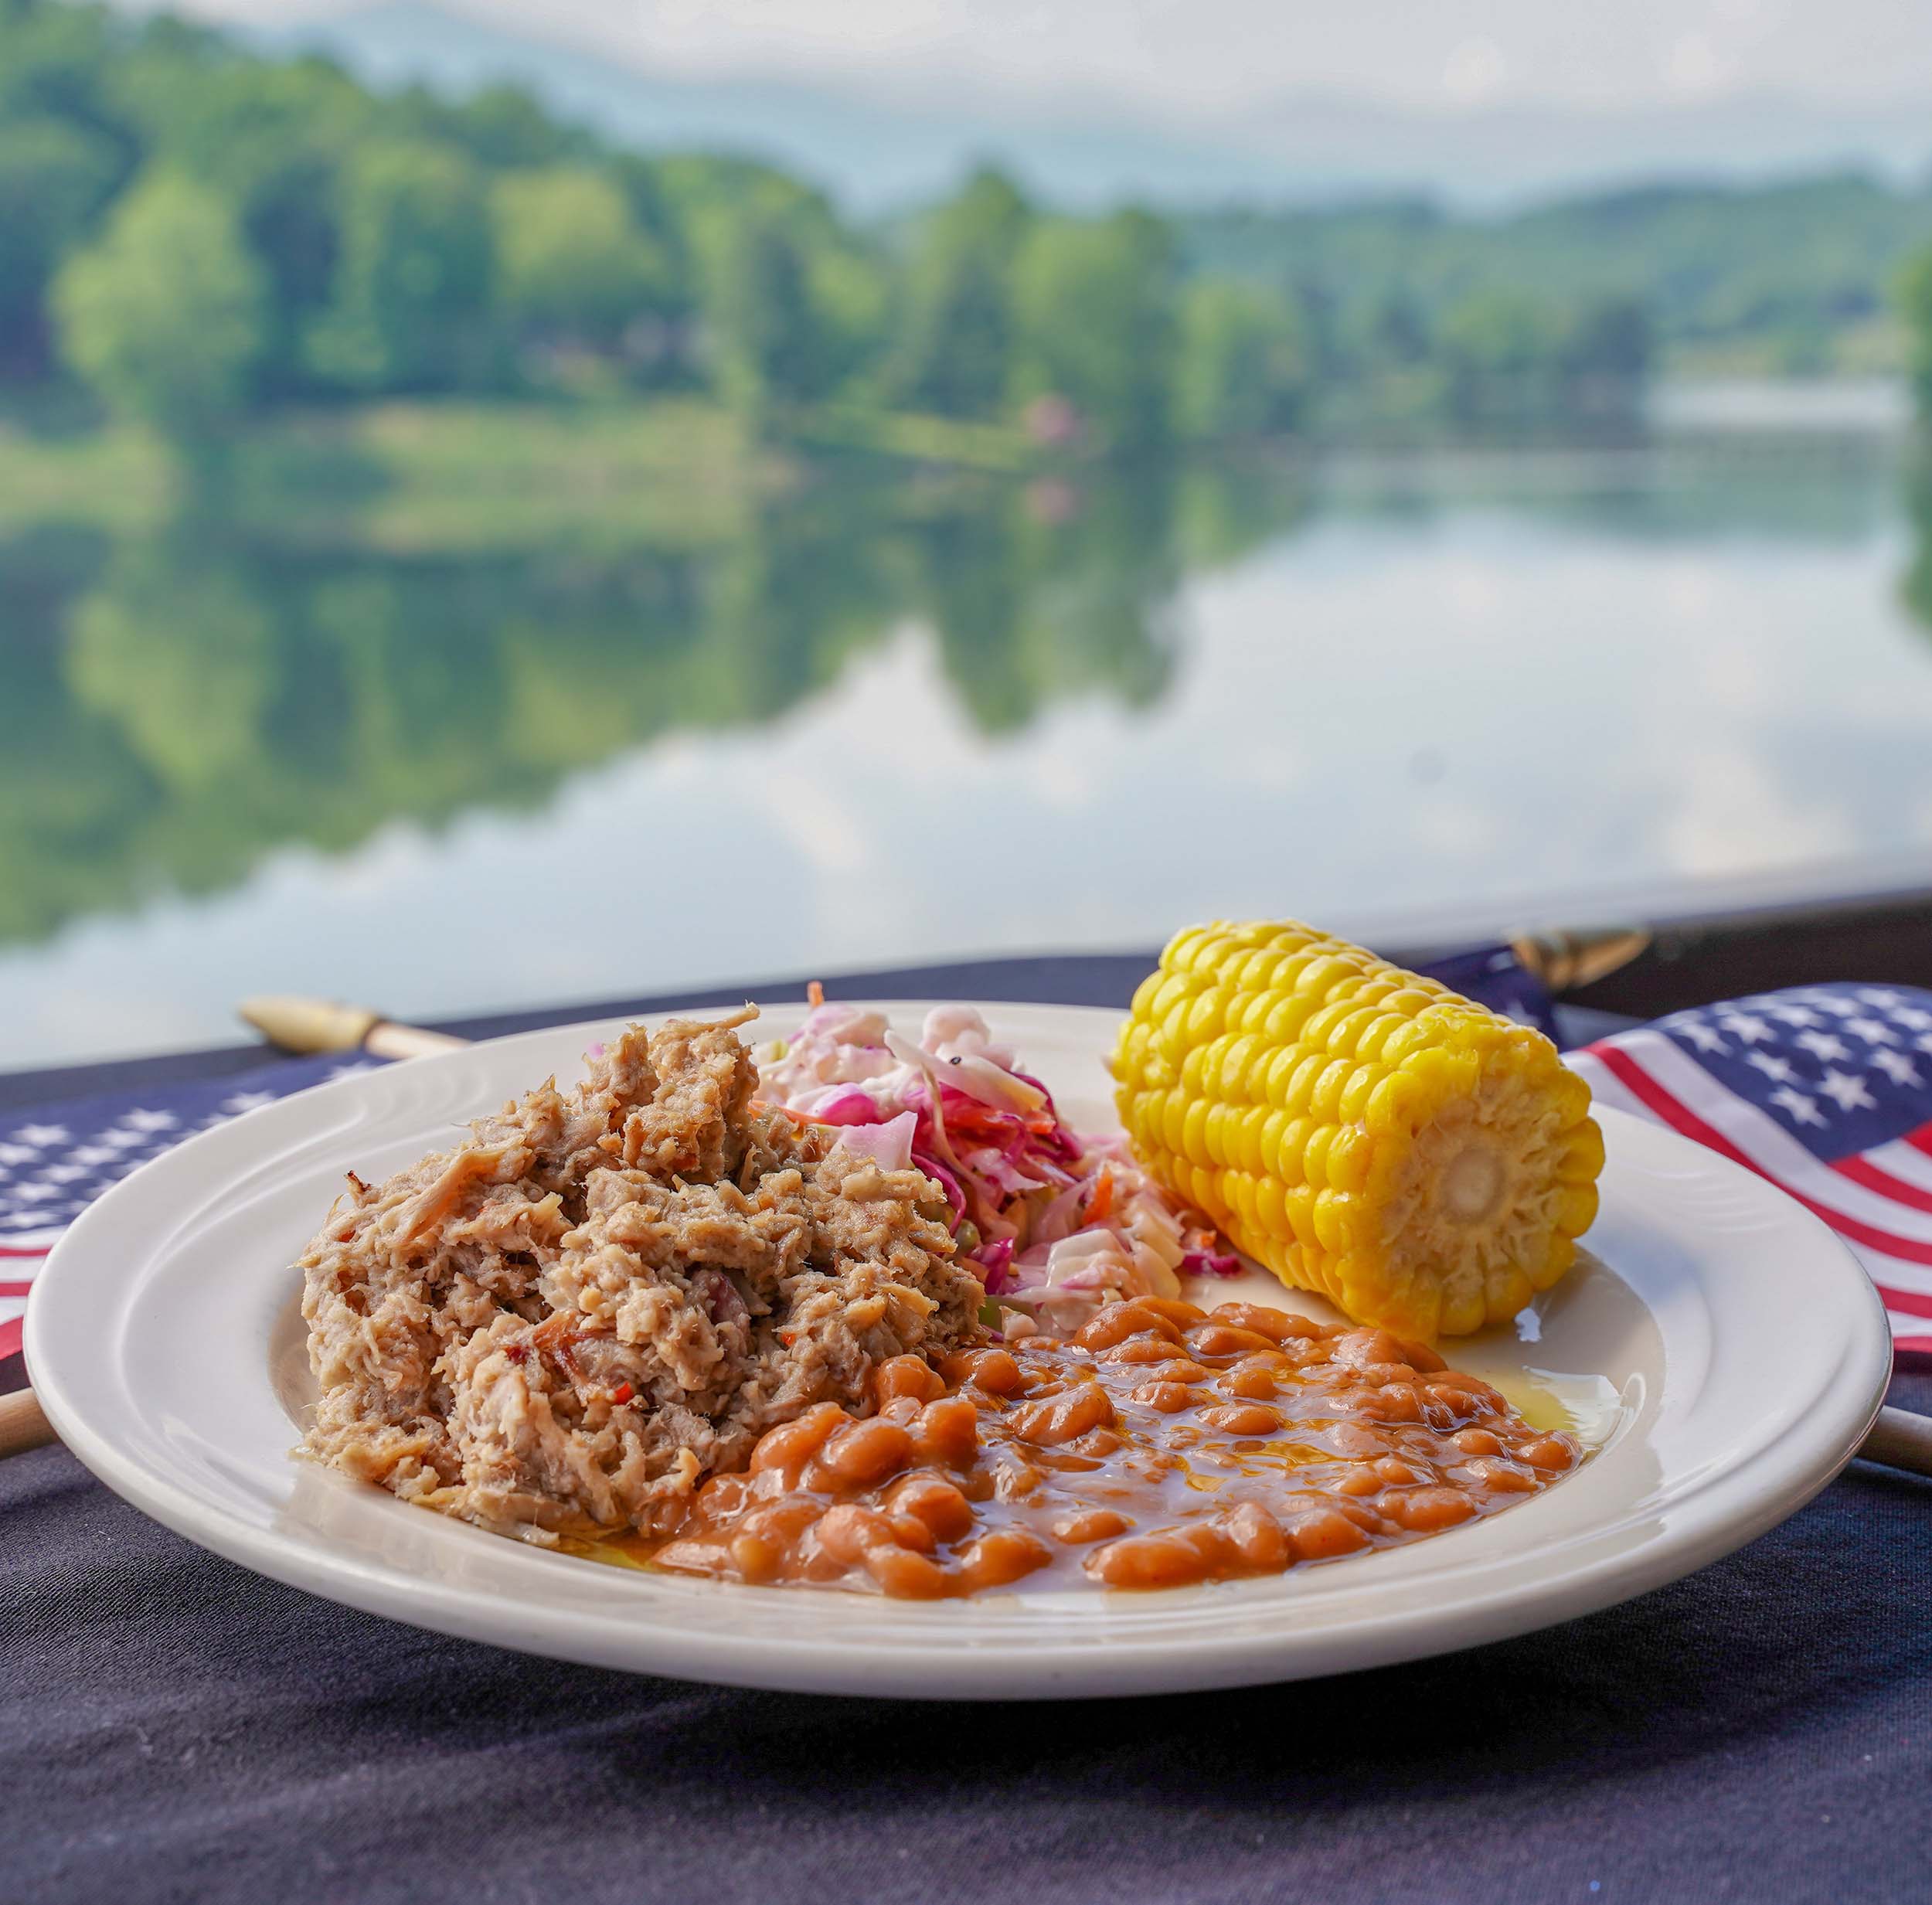 Barbecue Special at Lake Junaluska - Independence Day Celebrations